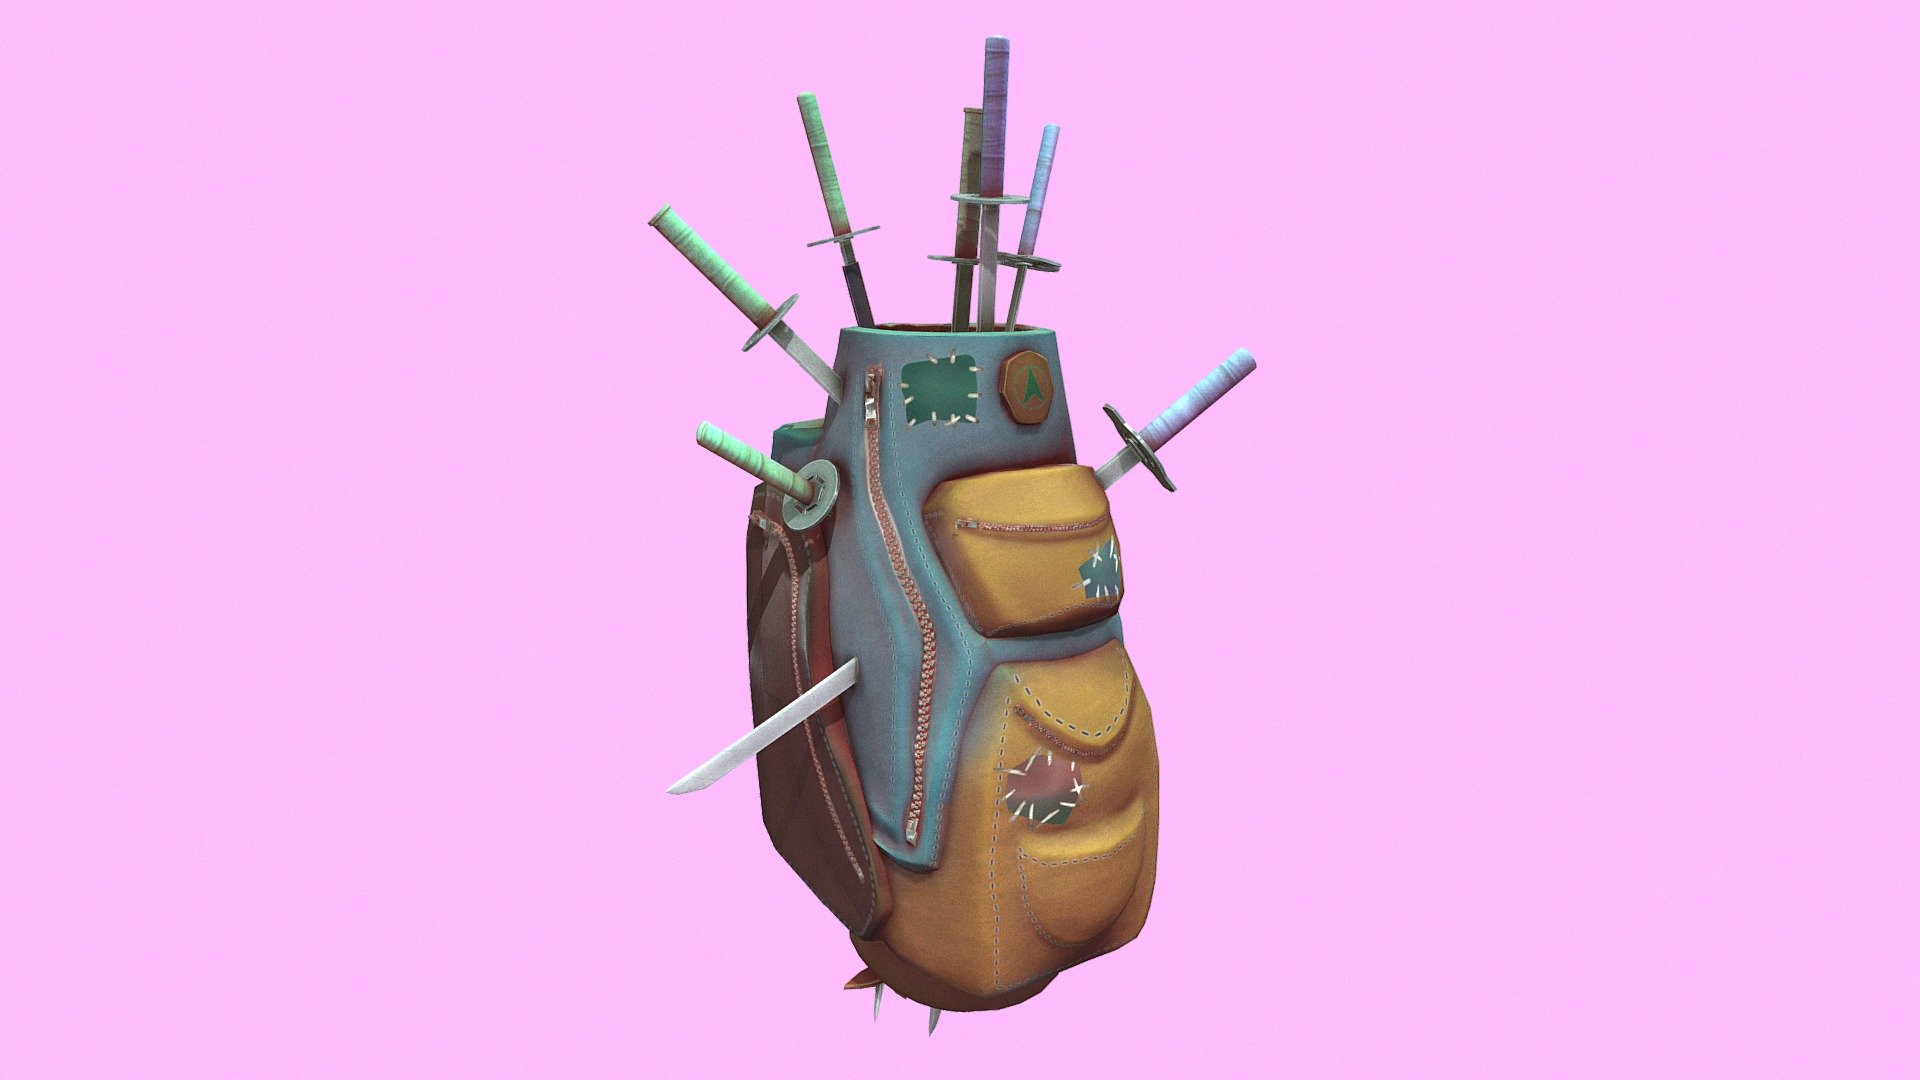 This project was funded by a fiverr customer. Description before creation: &ldquo;A stylised backpack with military/camping application, similar to fortnite style, open concept